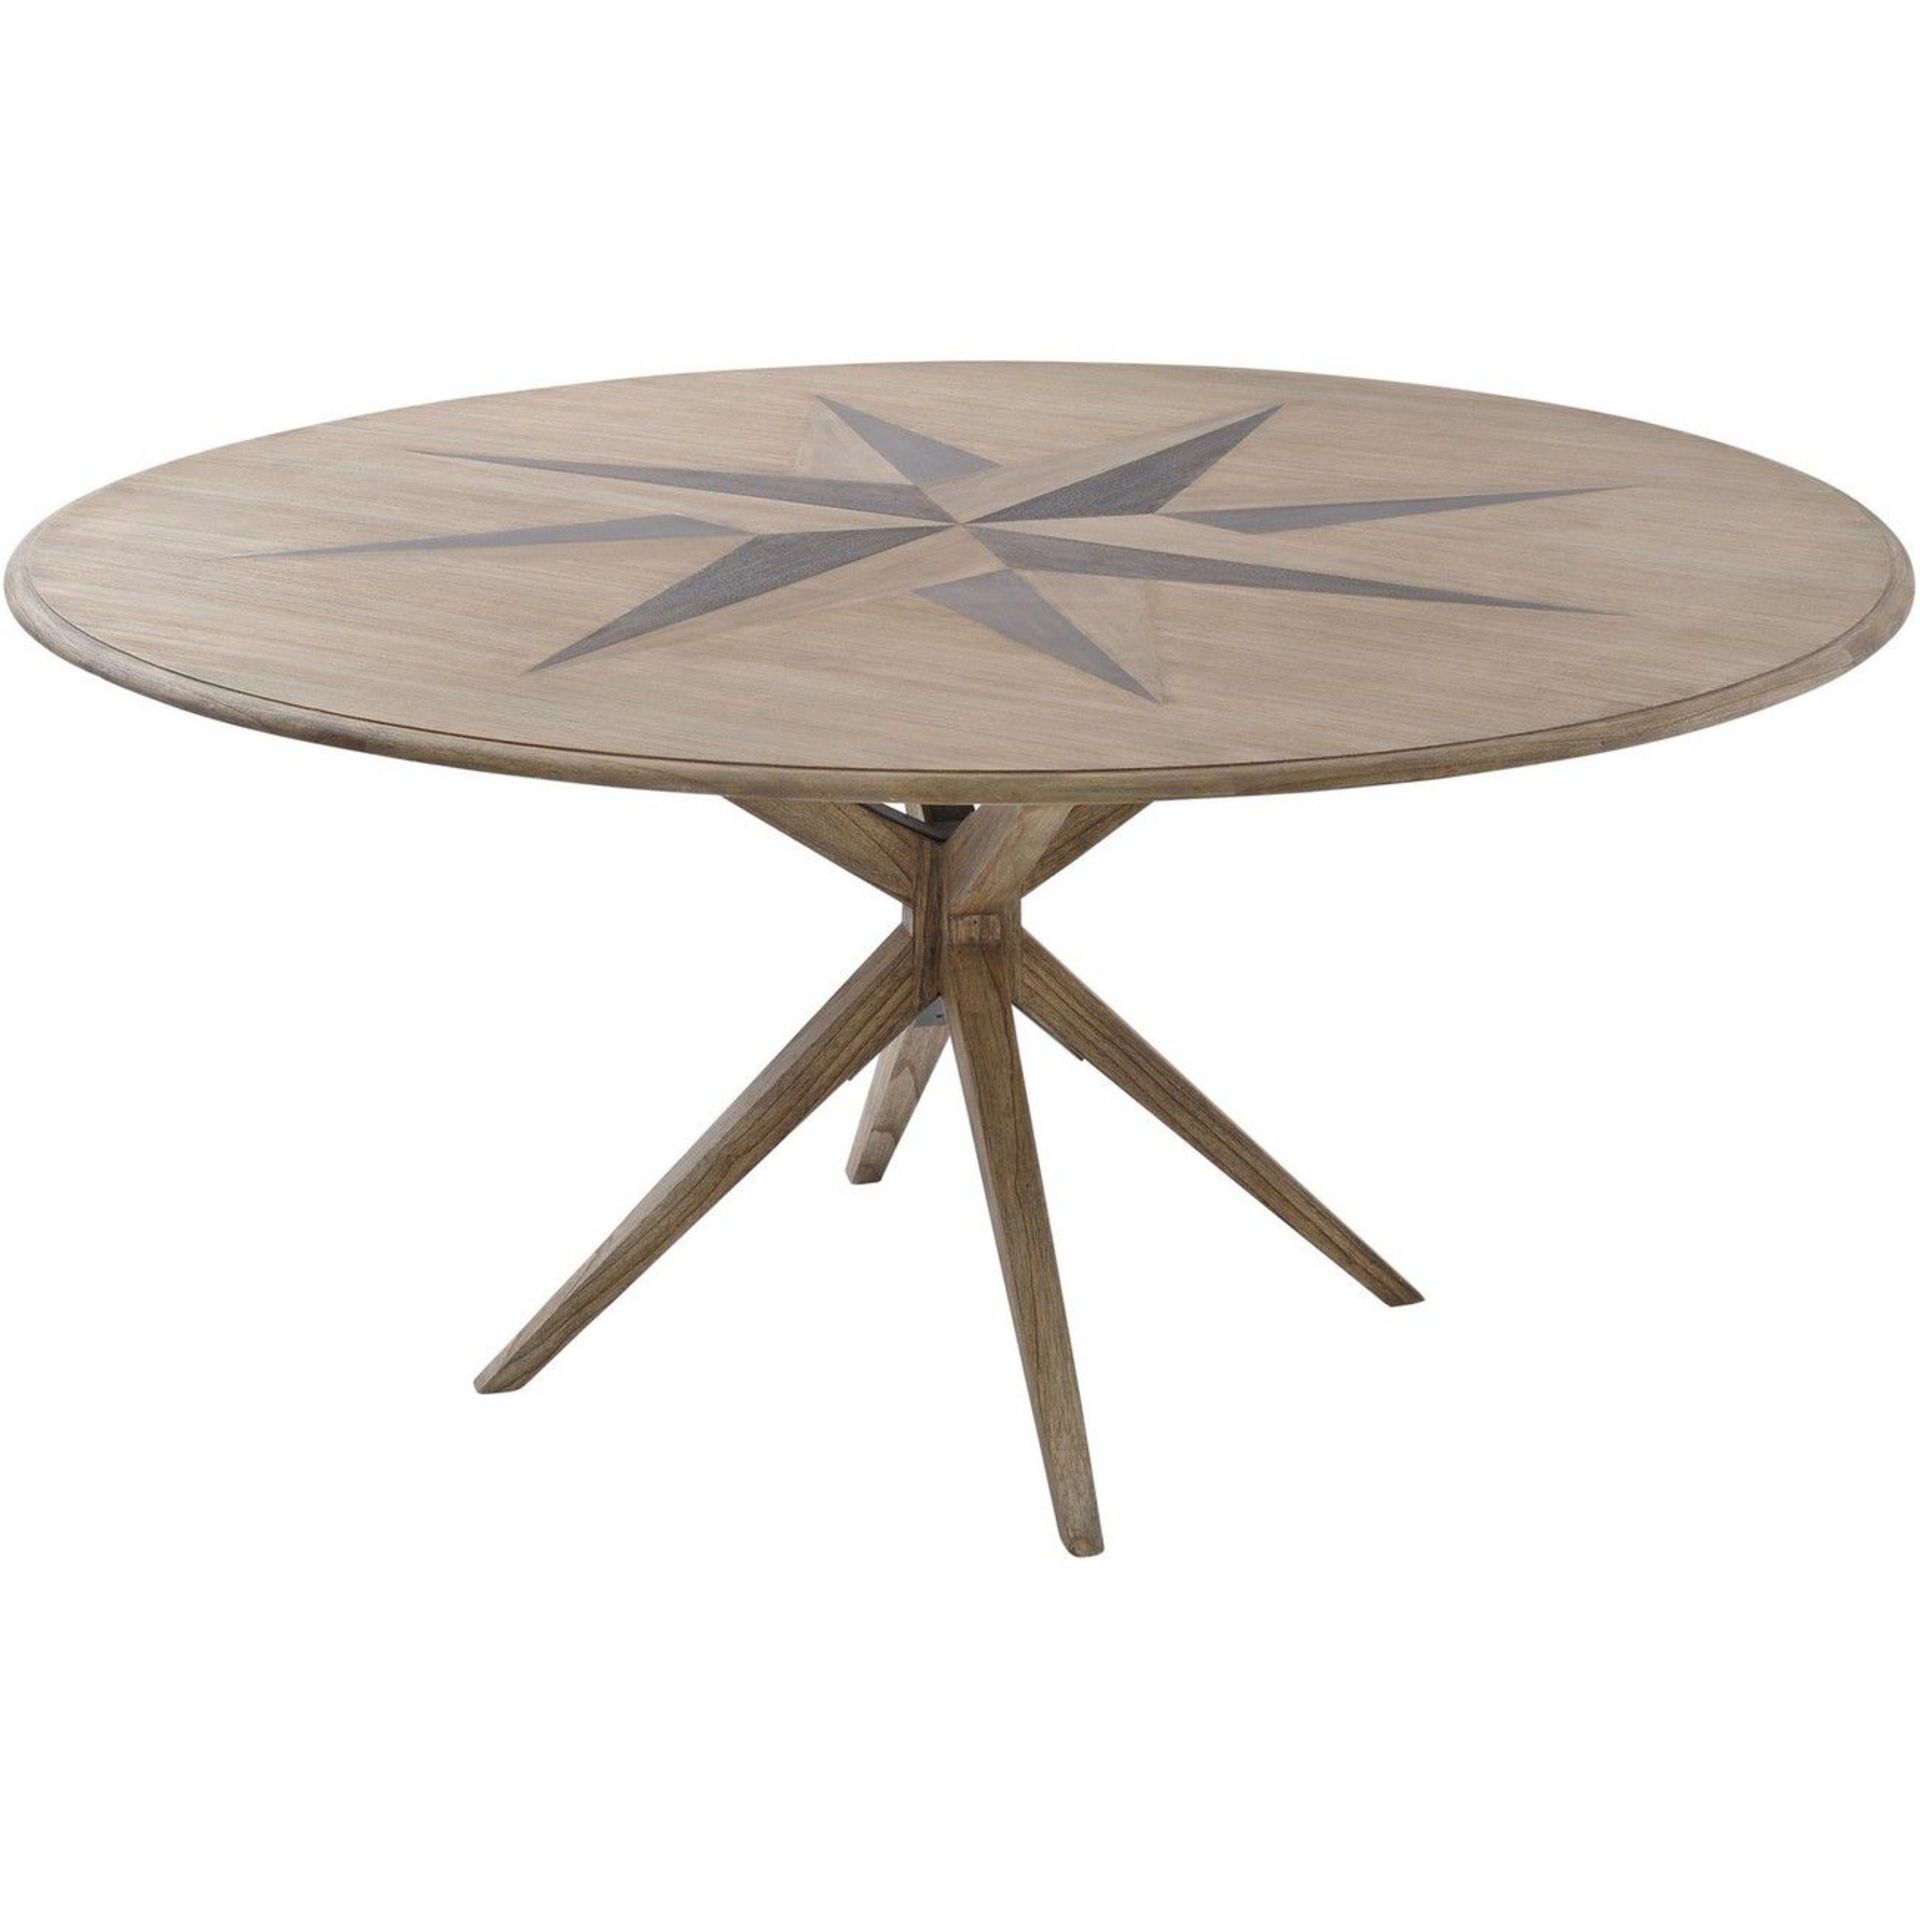 Mindi Wood 6 Seater Dining Table Artisan Crafted Mindi Wood 6 Seater Round Table With Impressive